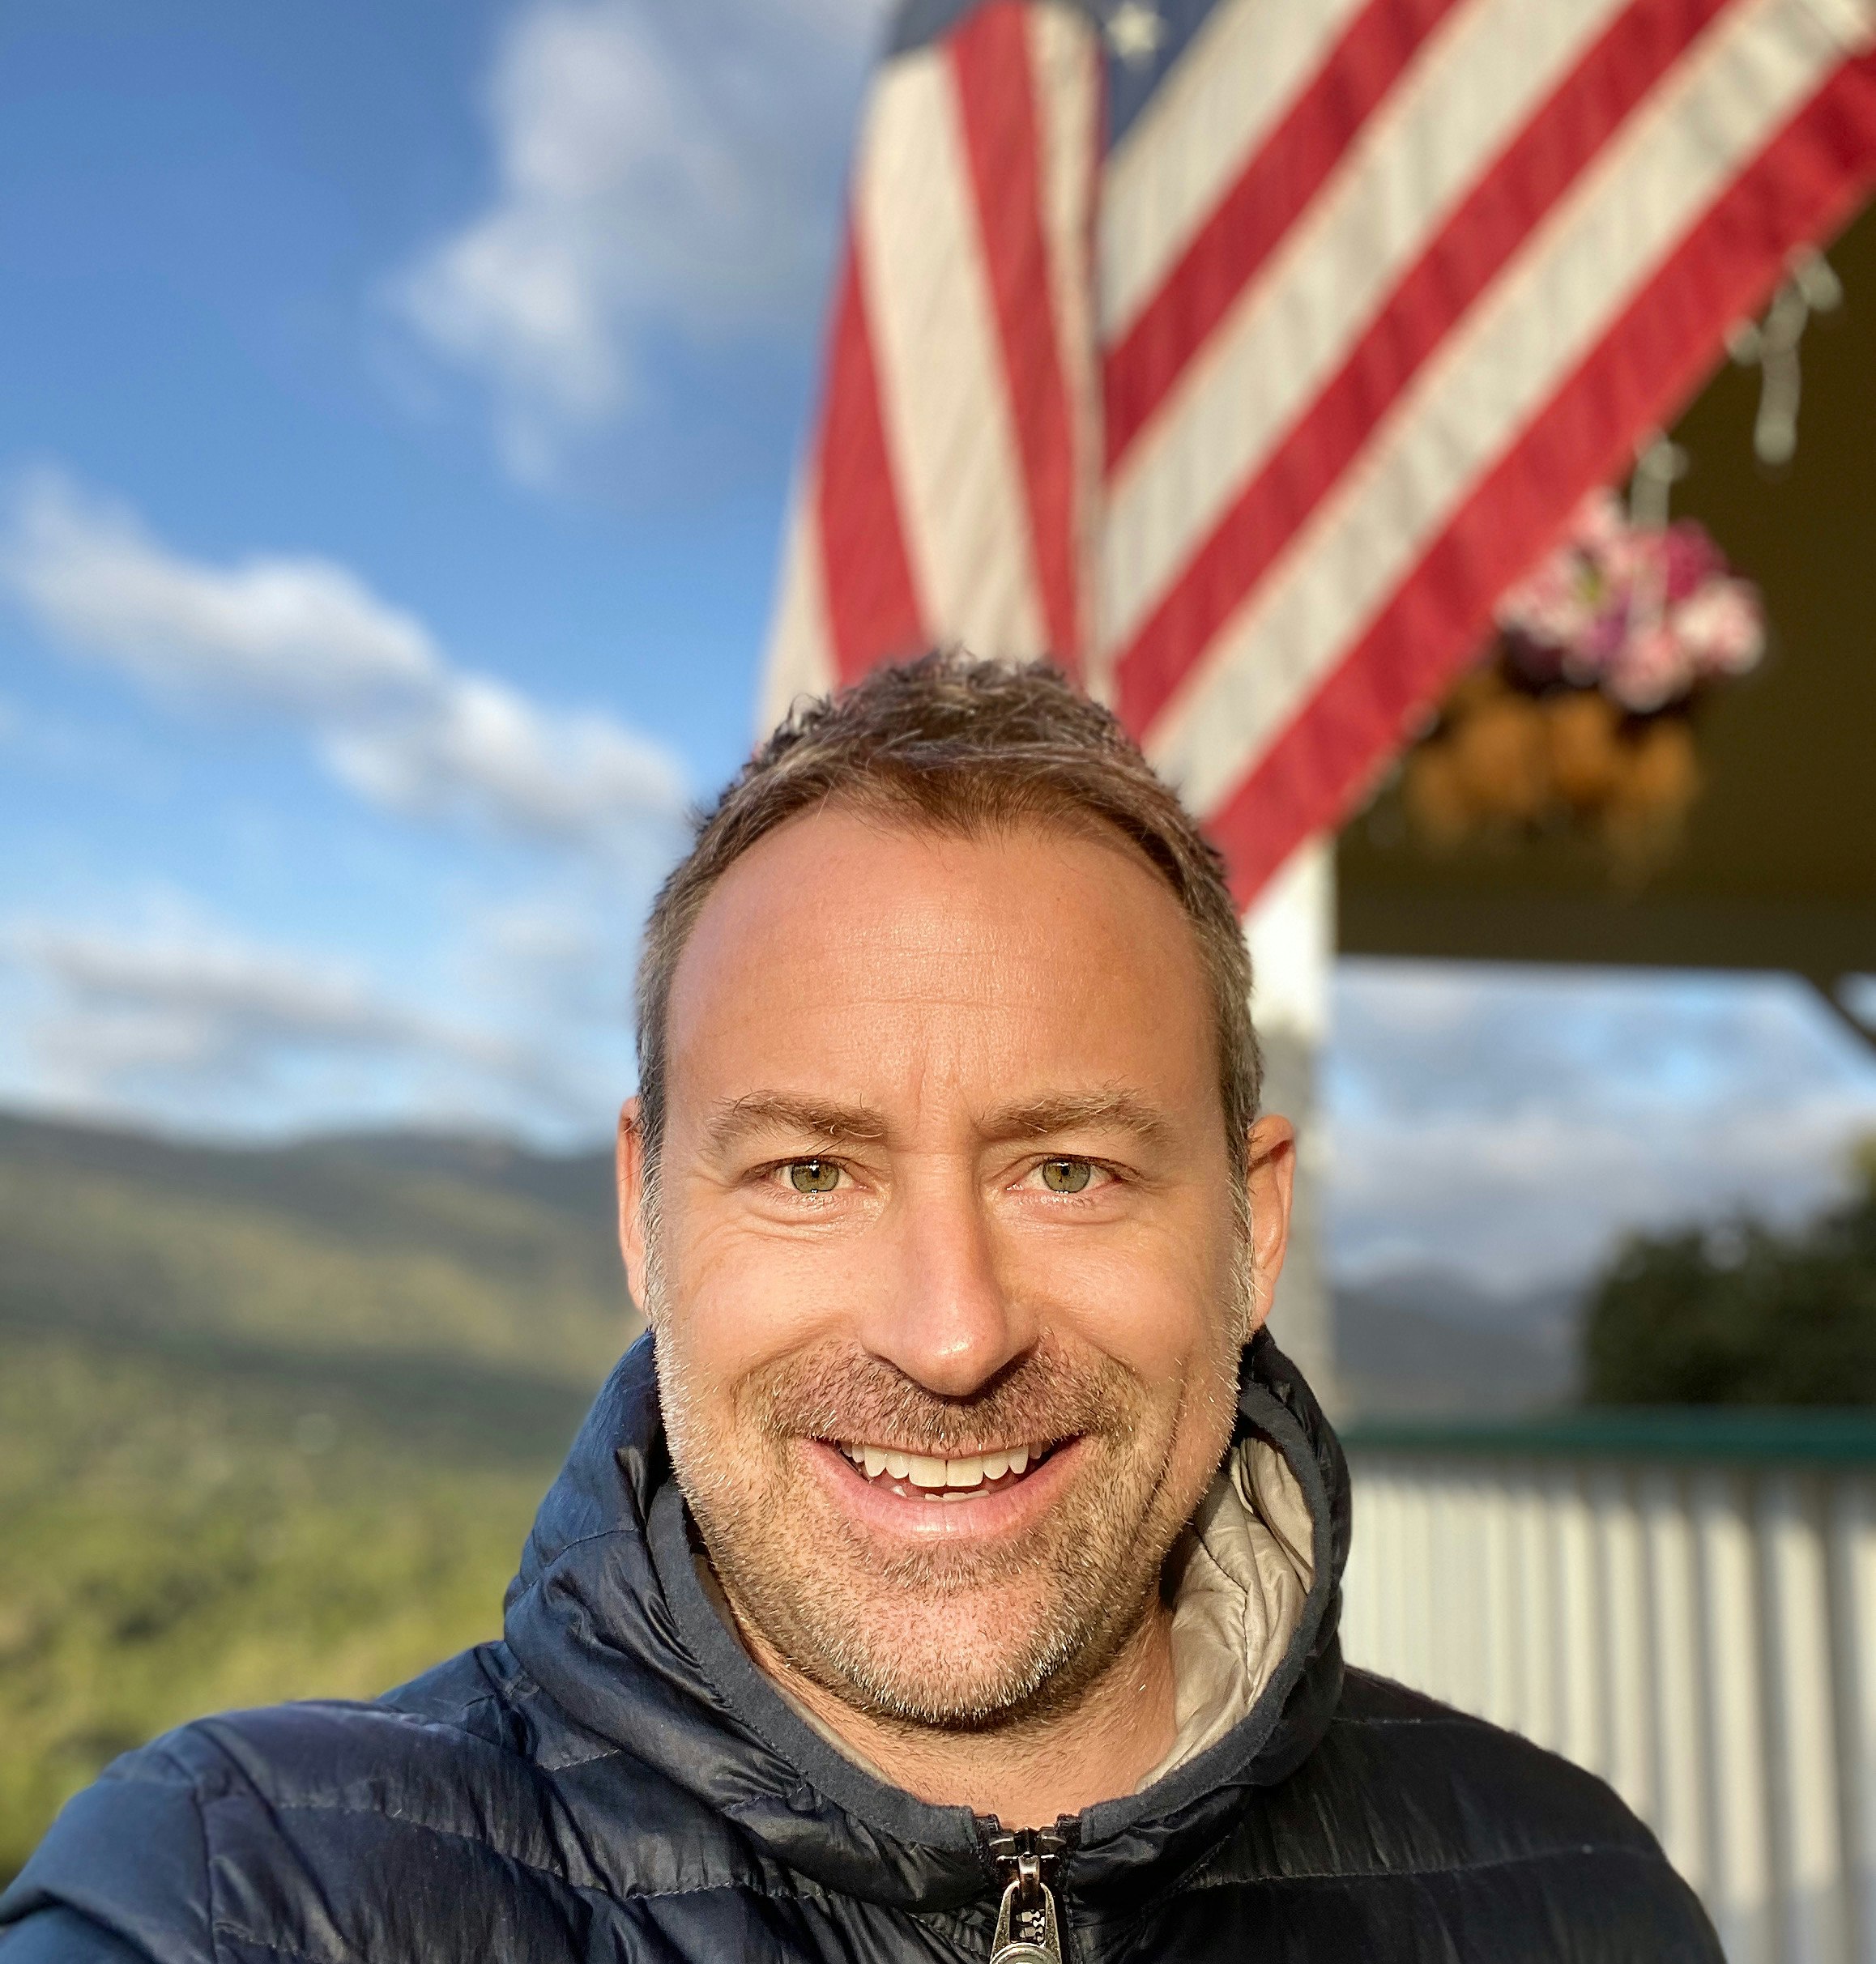 Writer Kevin Raub stands in front of an American-flag-draped structure and hilly scenery.